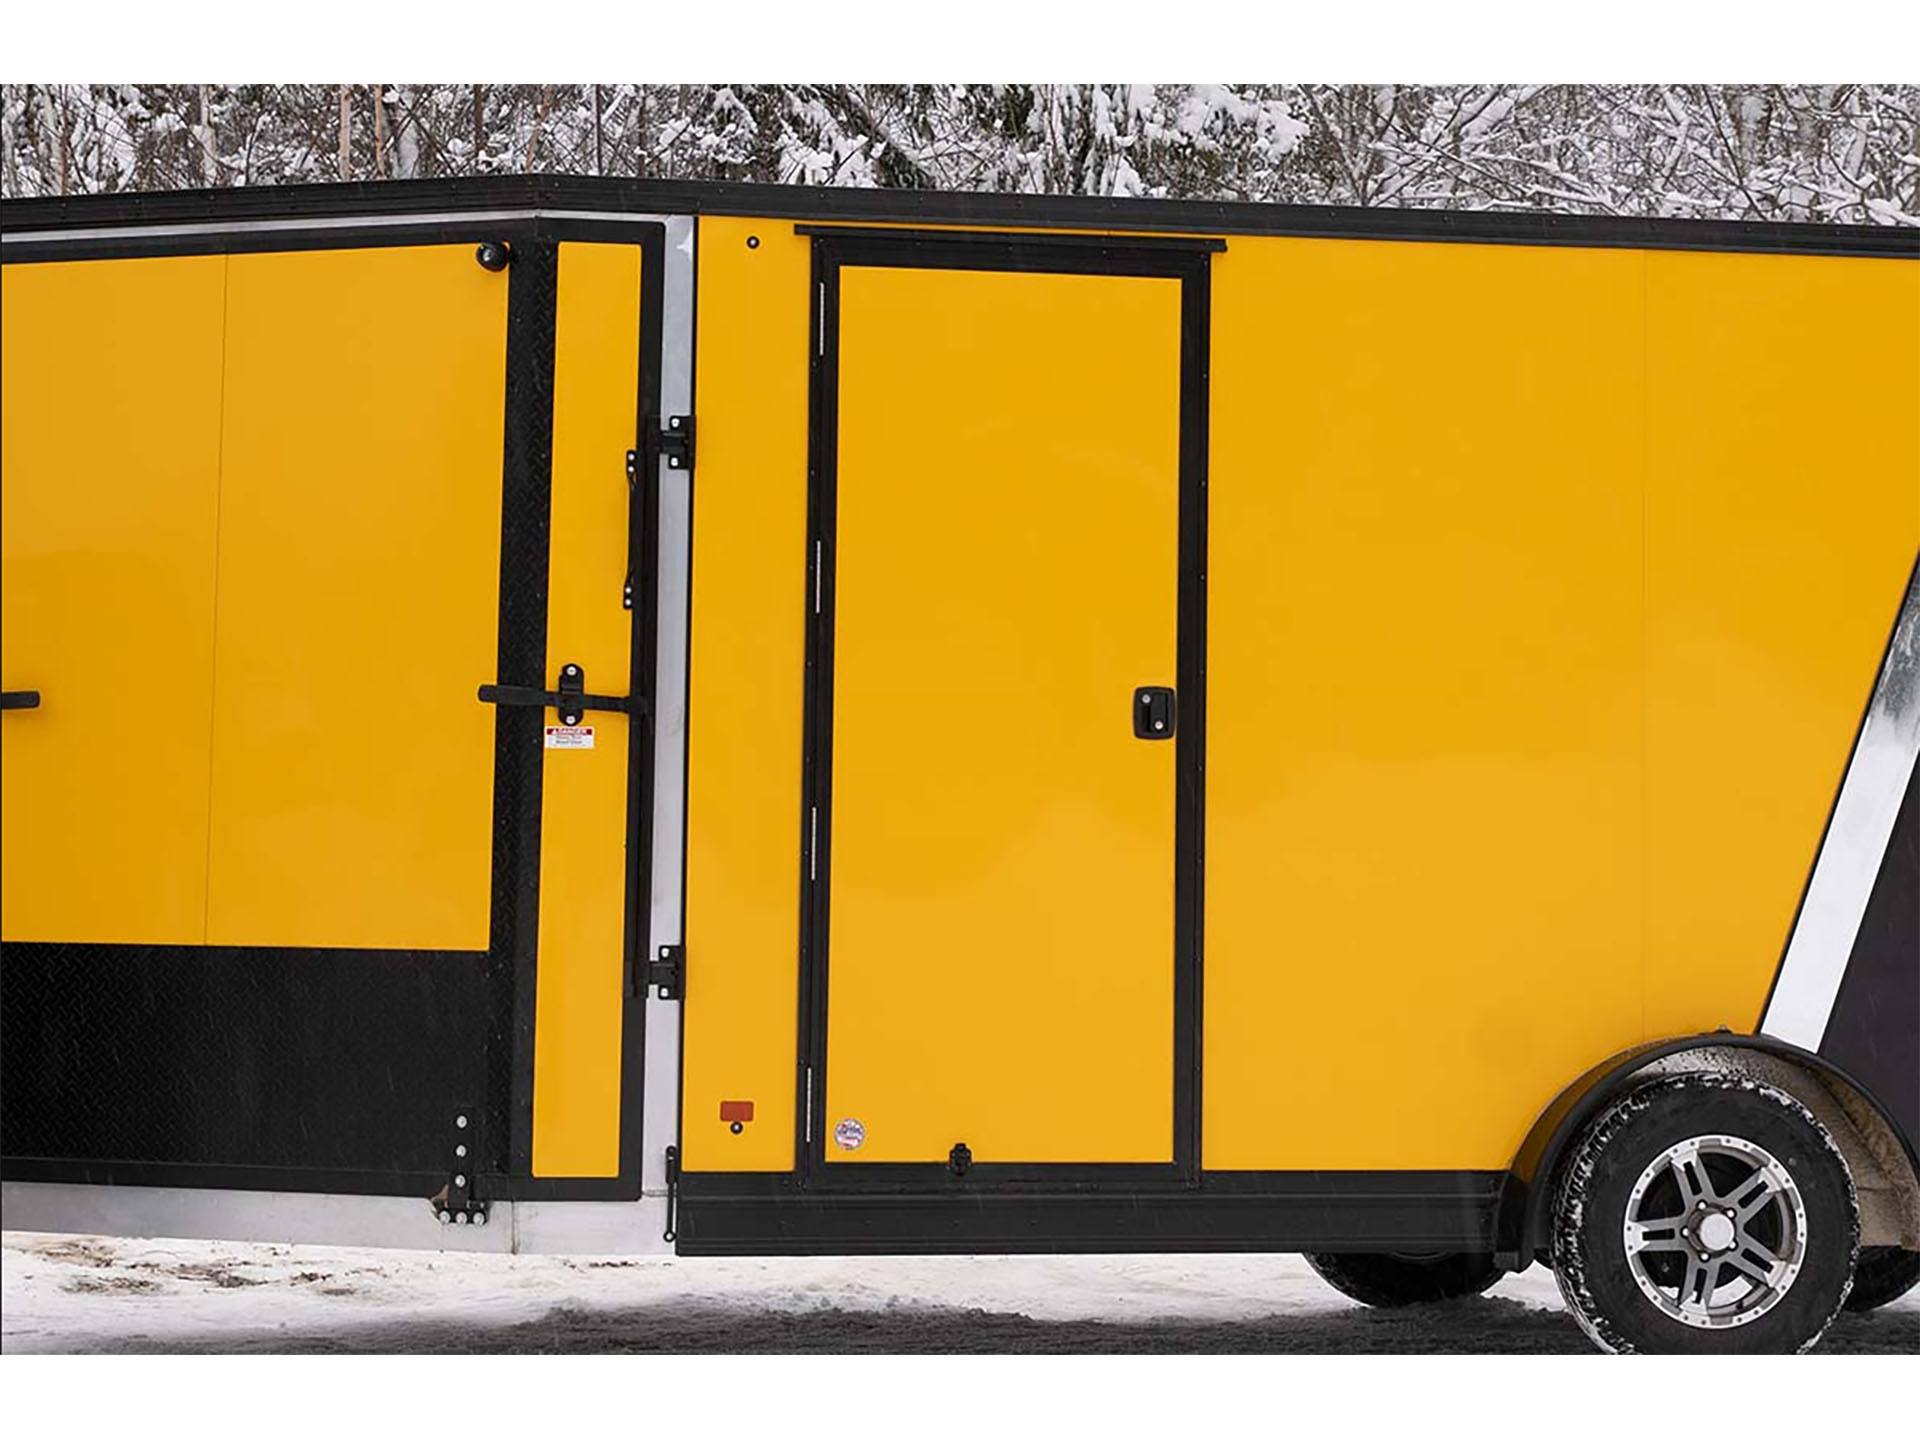 2024 Polaris Trailers Enclosed Cargo Trailers 6 ft. Wide - 10 ft. Long in Lancaster, Texas - Photo 6